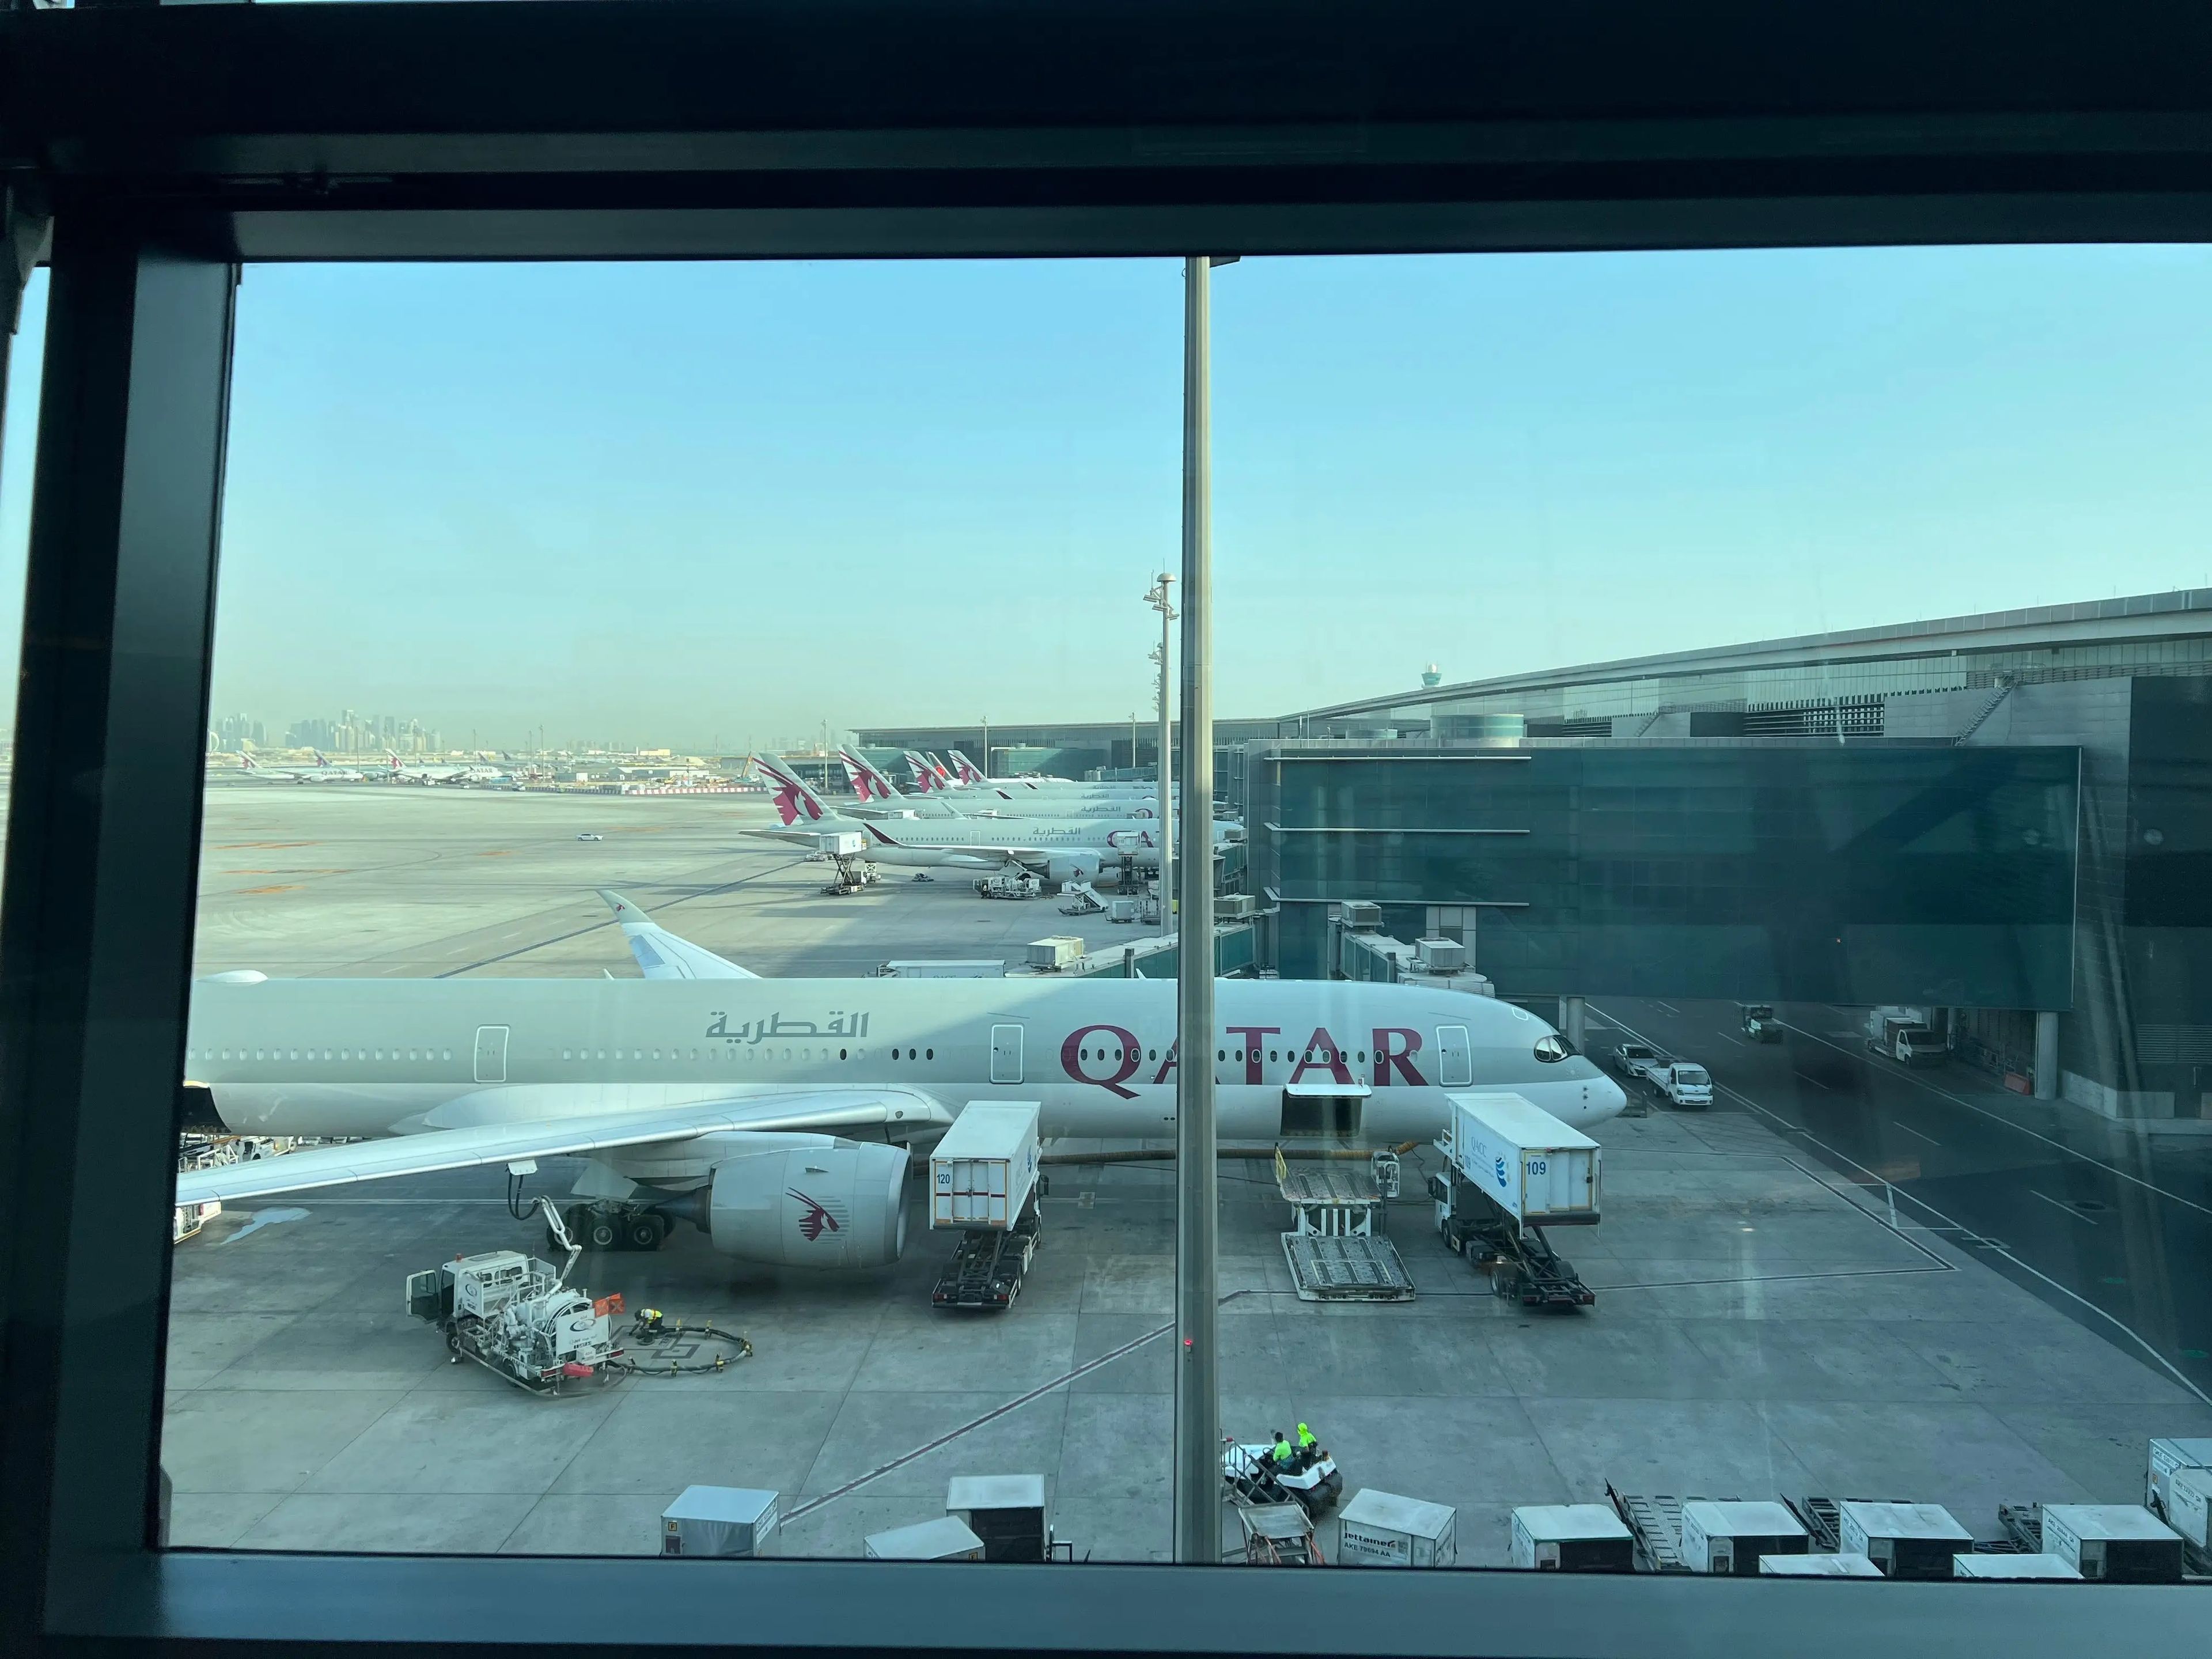 A Qatar Airways plane in the Doha Airport.